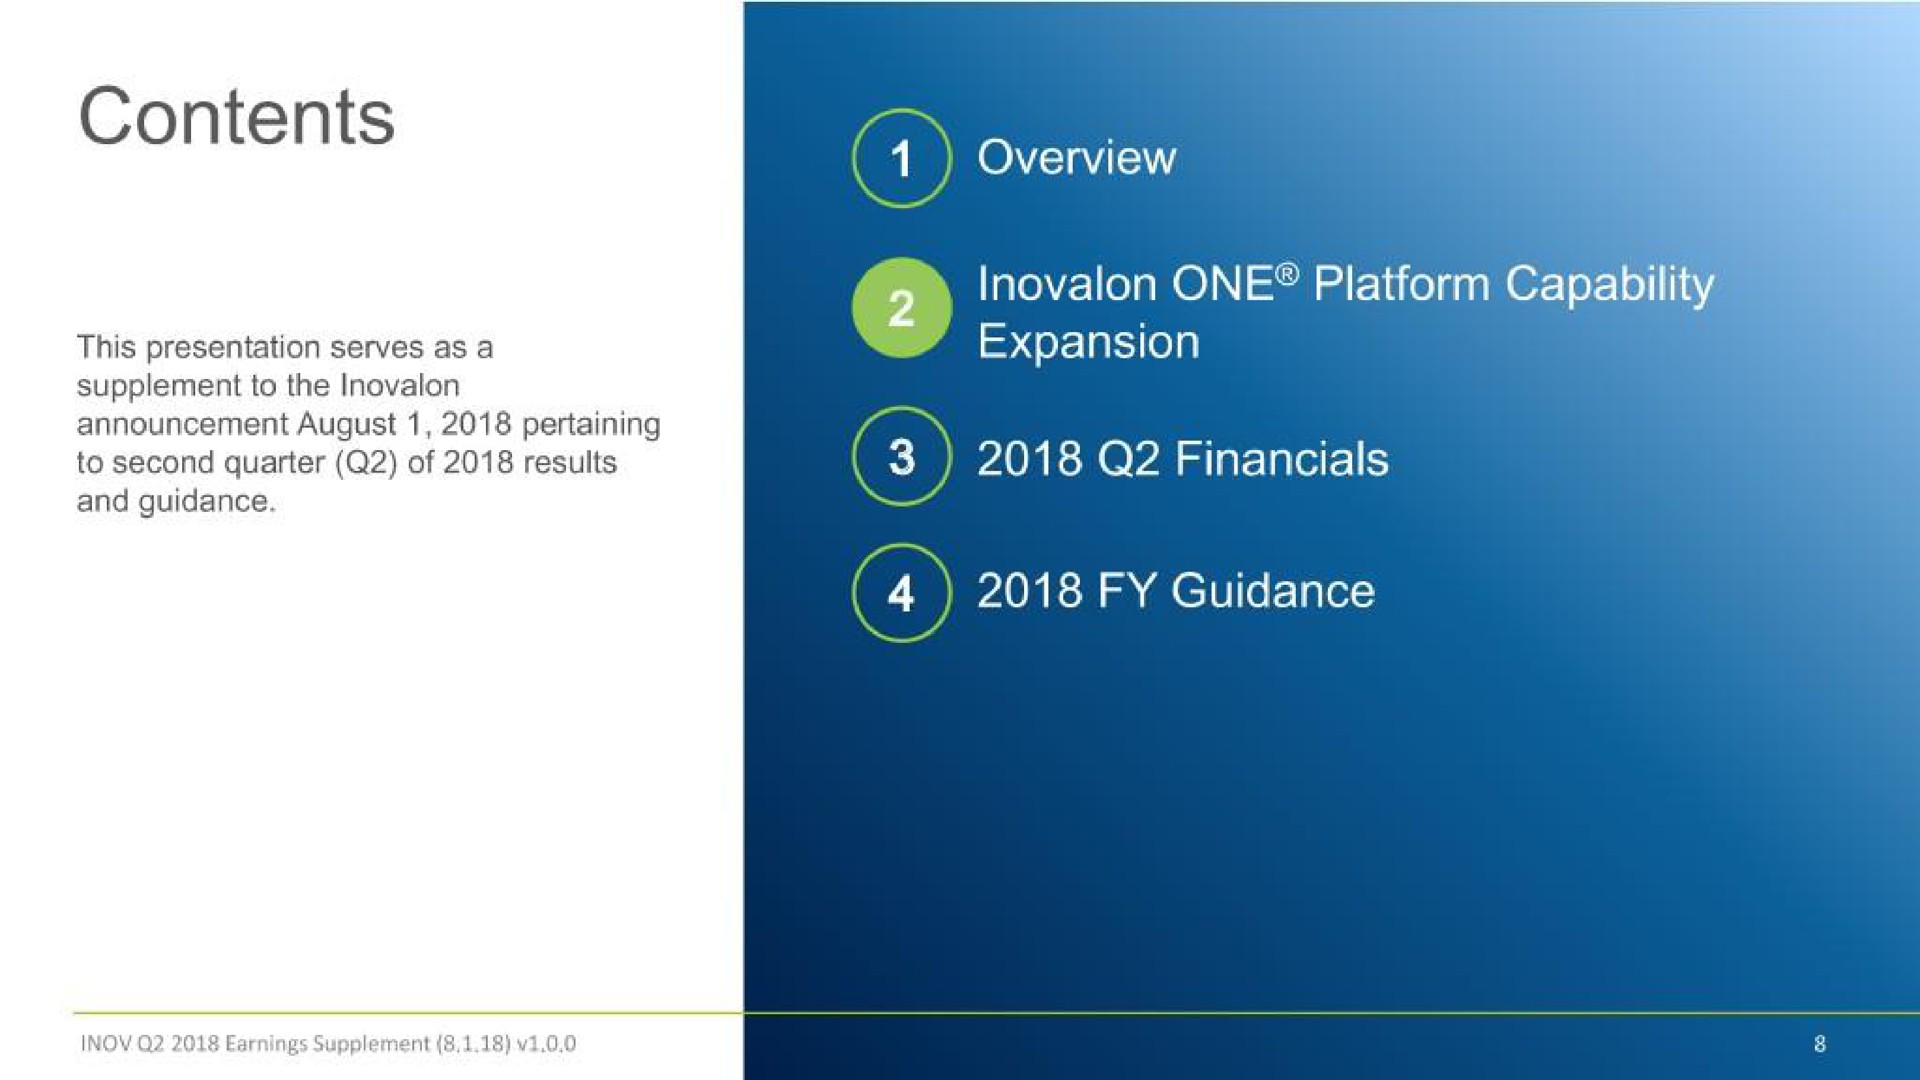 contents one platform capability expansion guidance | Inovalon